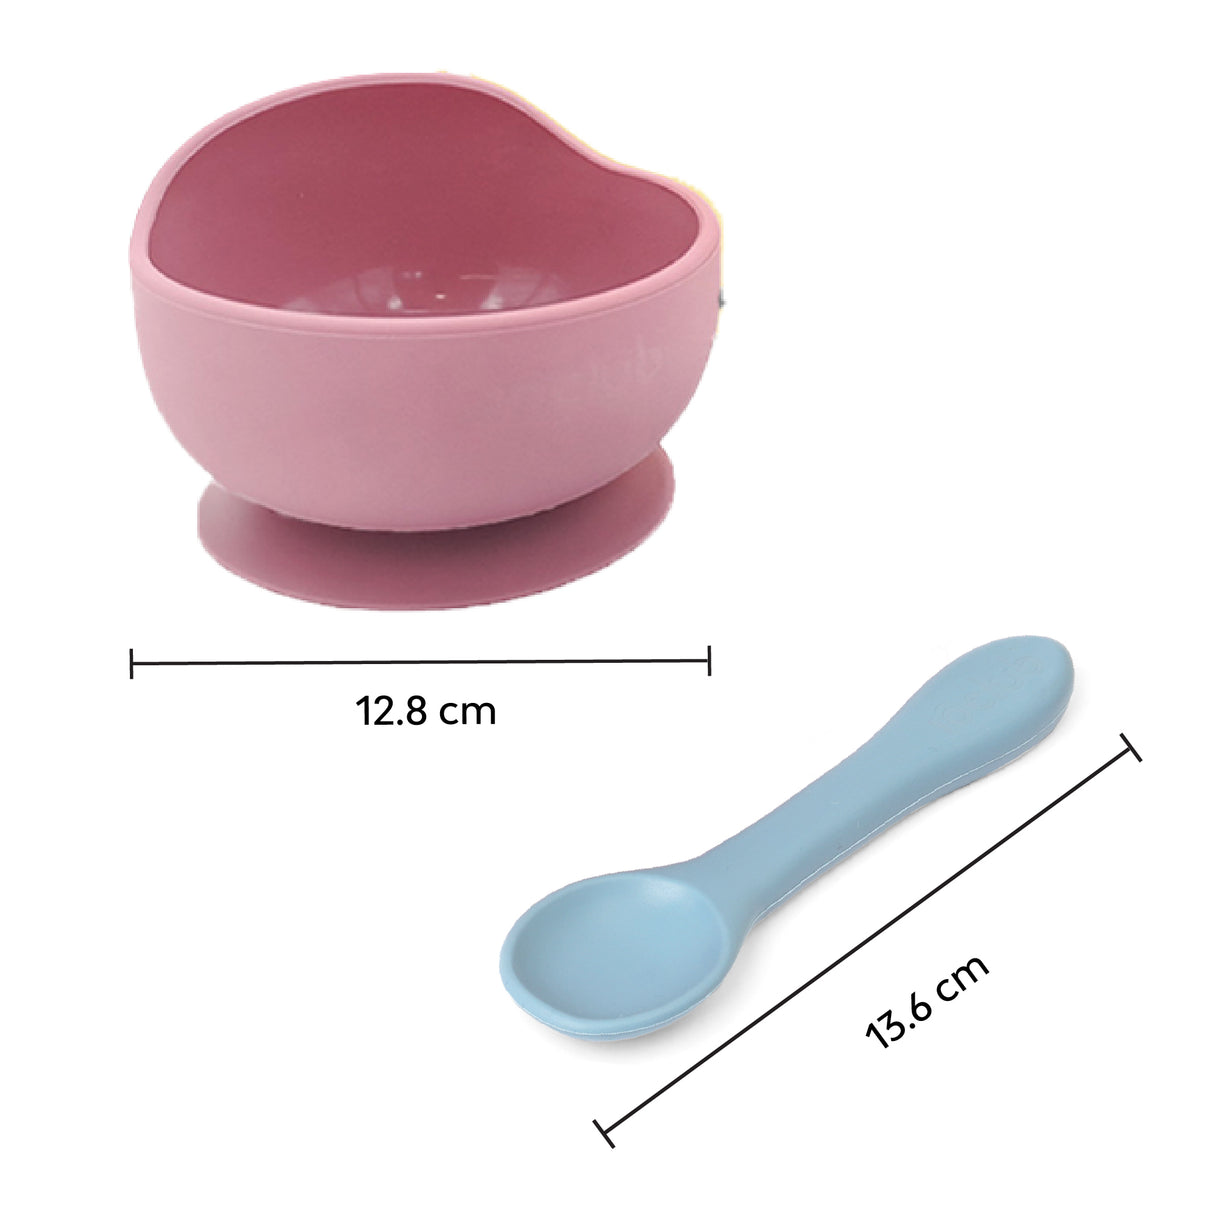 Microwave safe Silicone bowl gift set for kids 